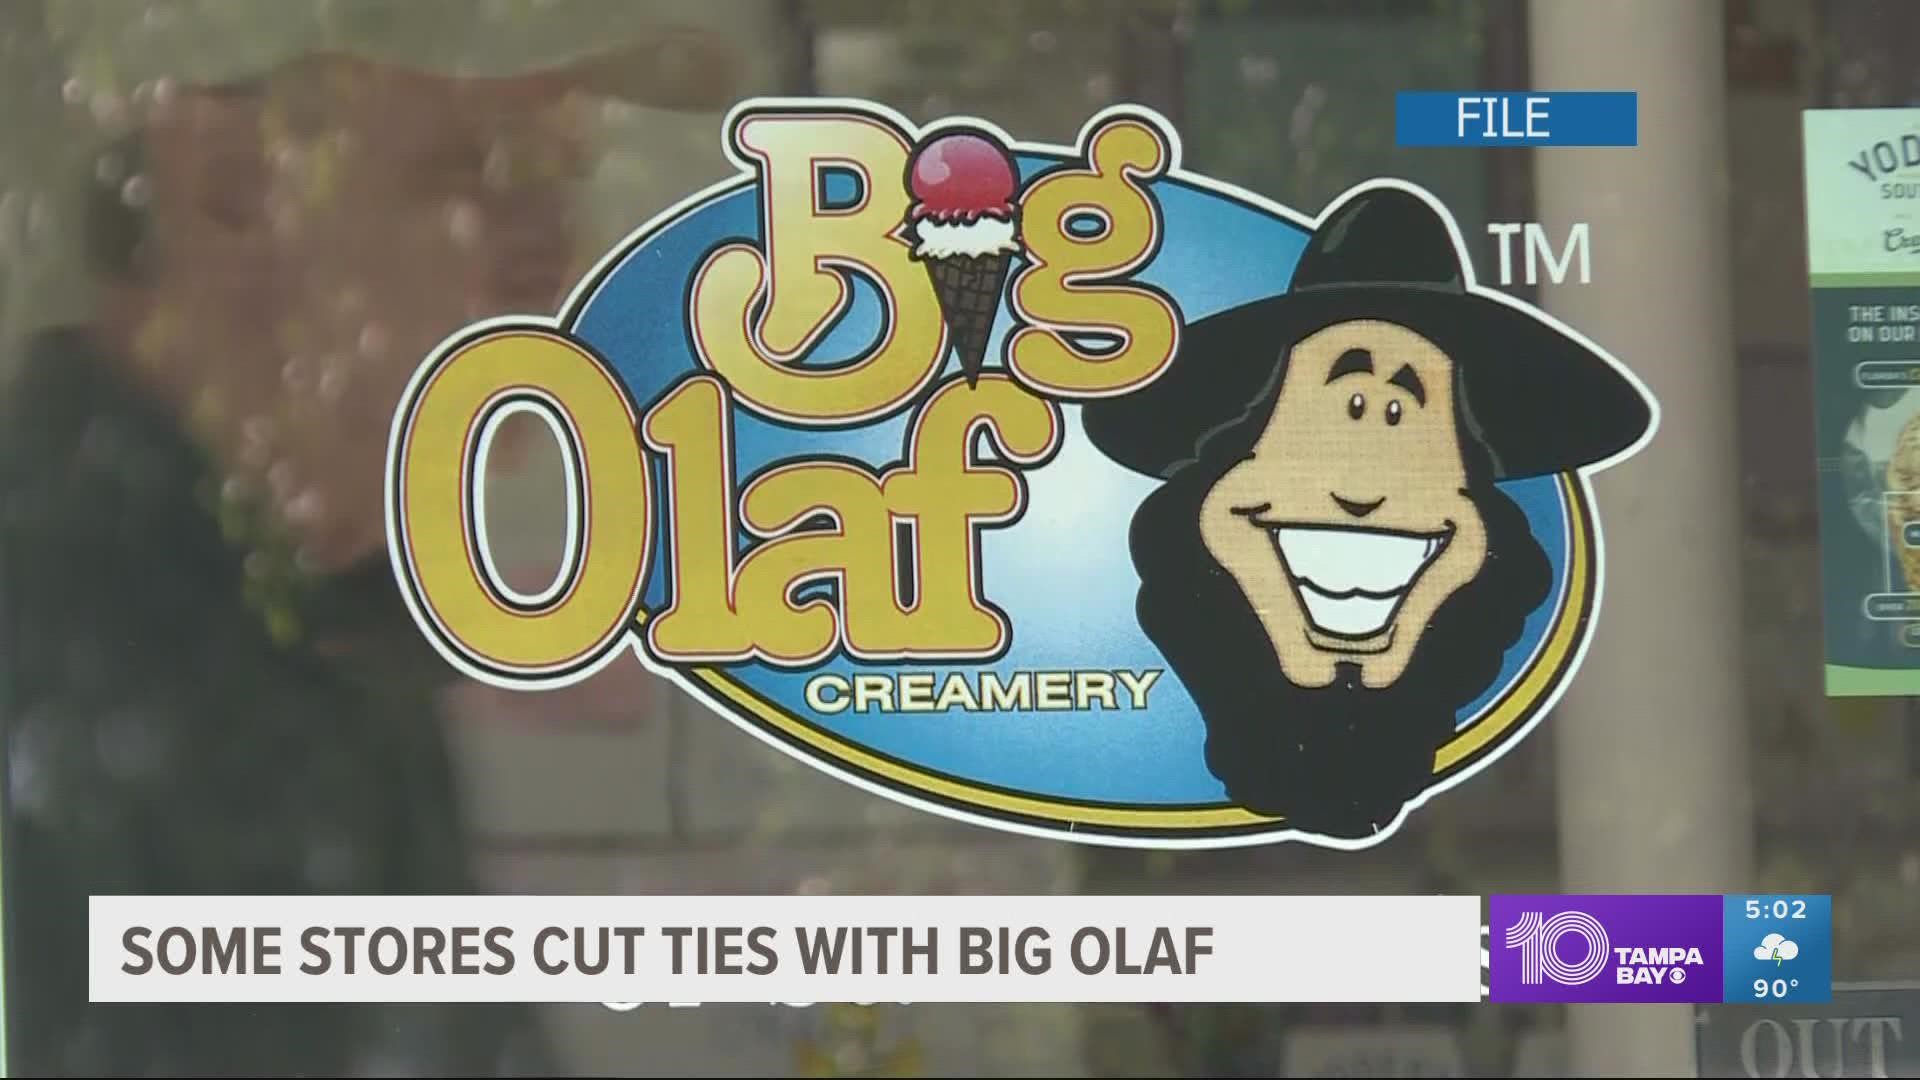 Samples taken from Big Olaf Creamery's factory found that 16 of 17 flavors tested were positive for Listeria monocytogenes, FDACS found.